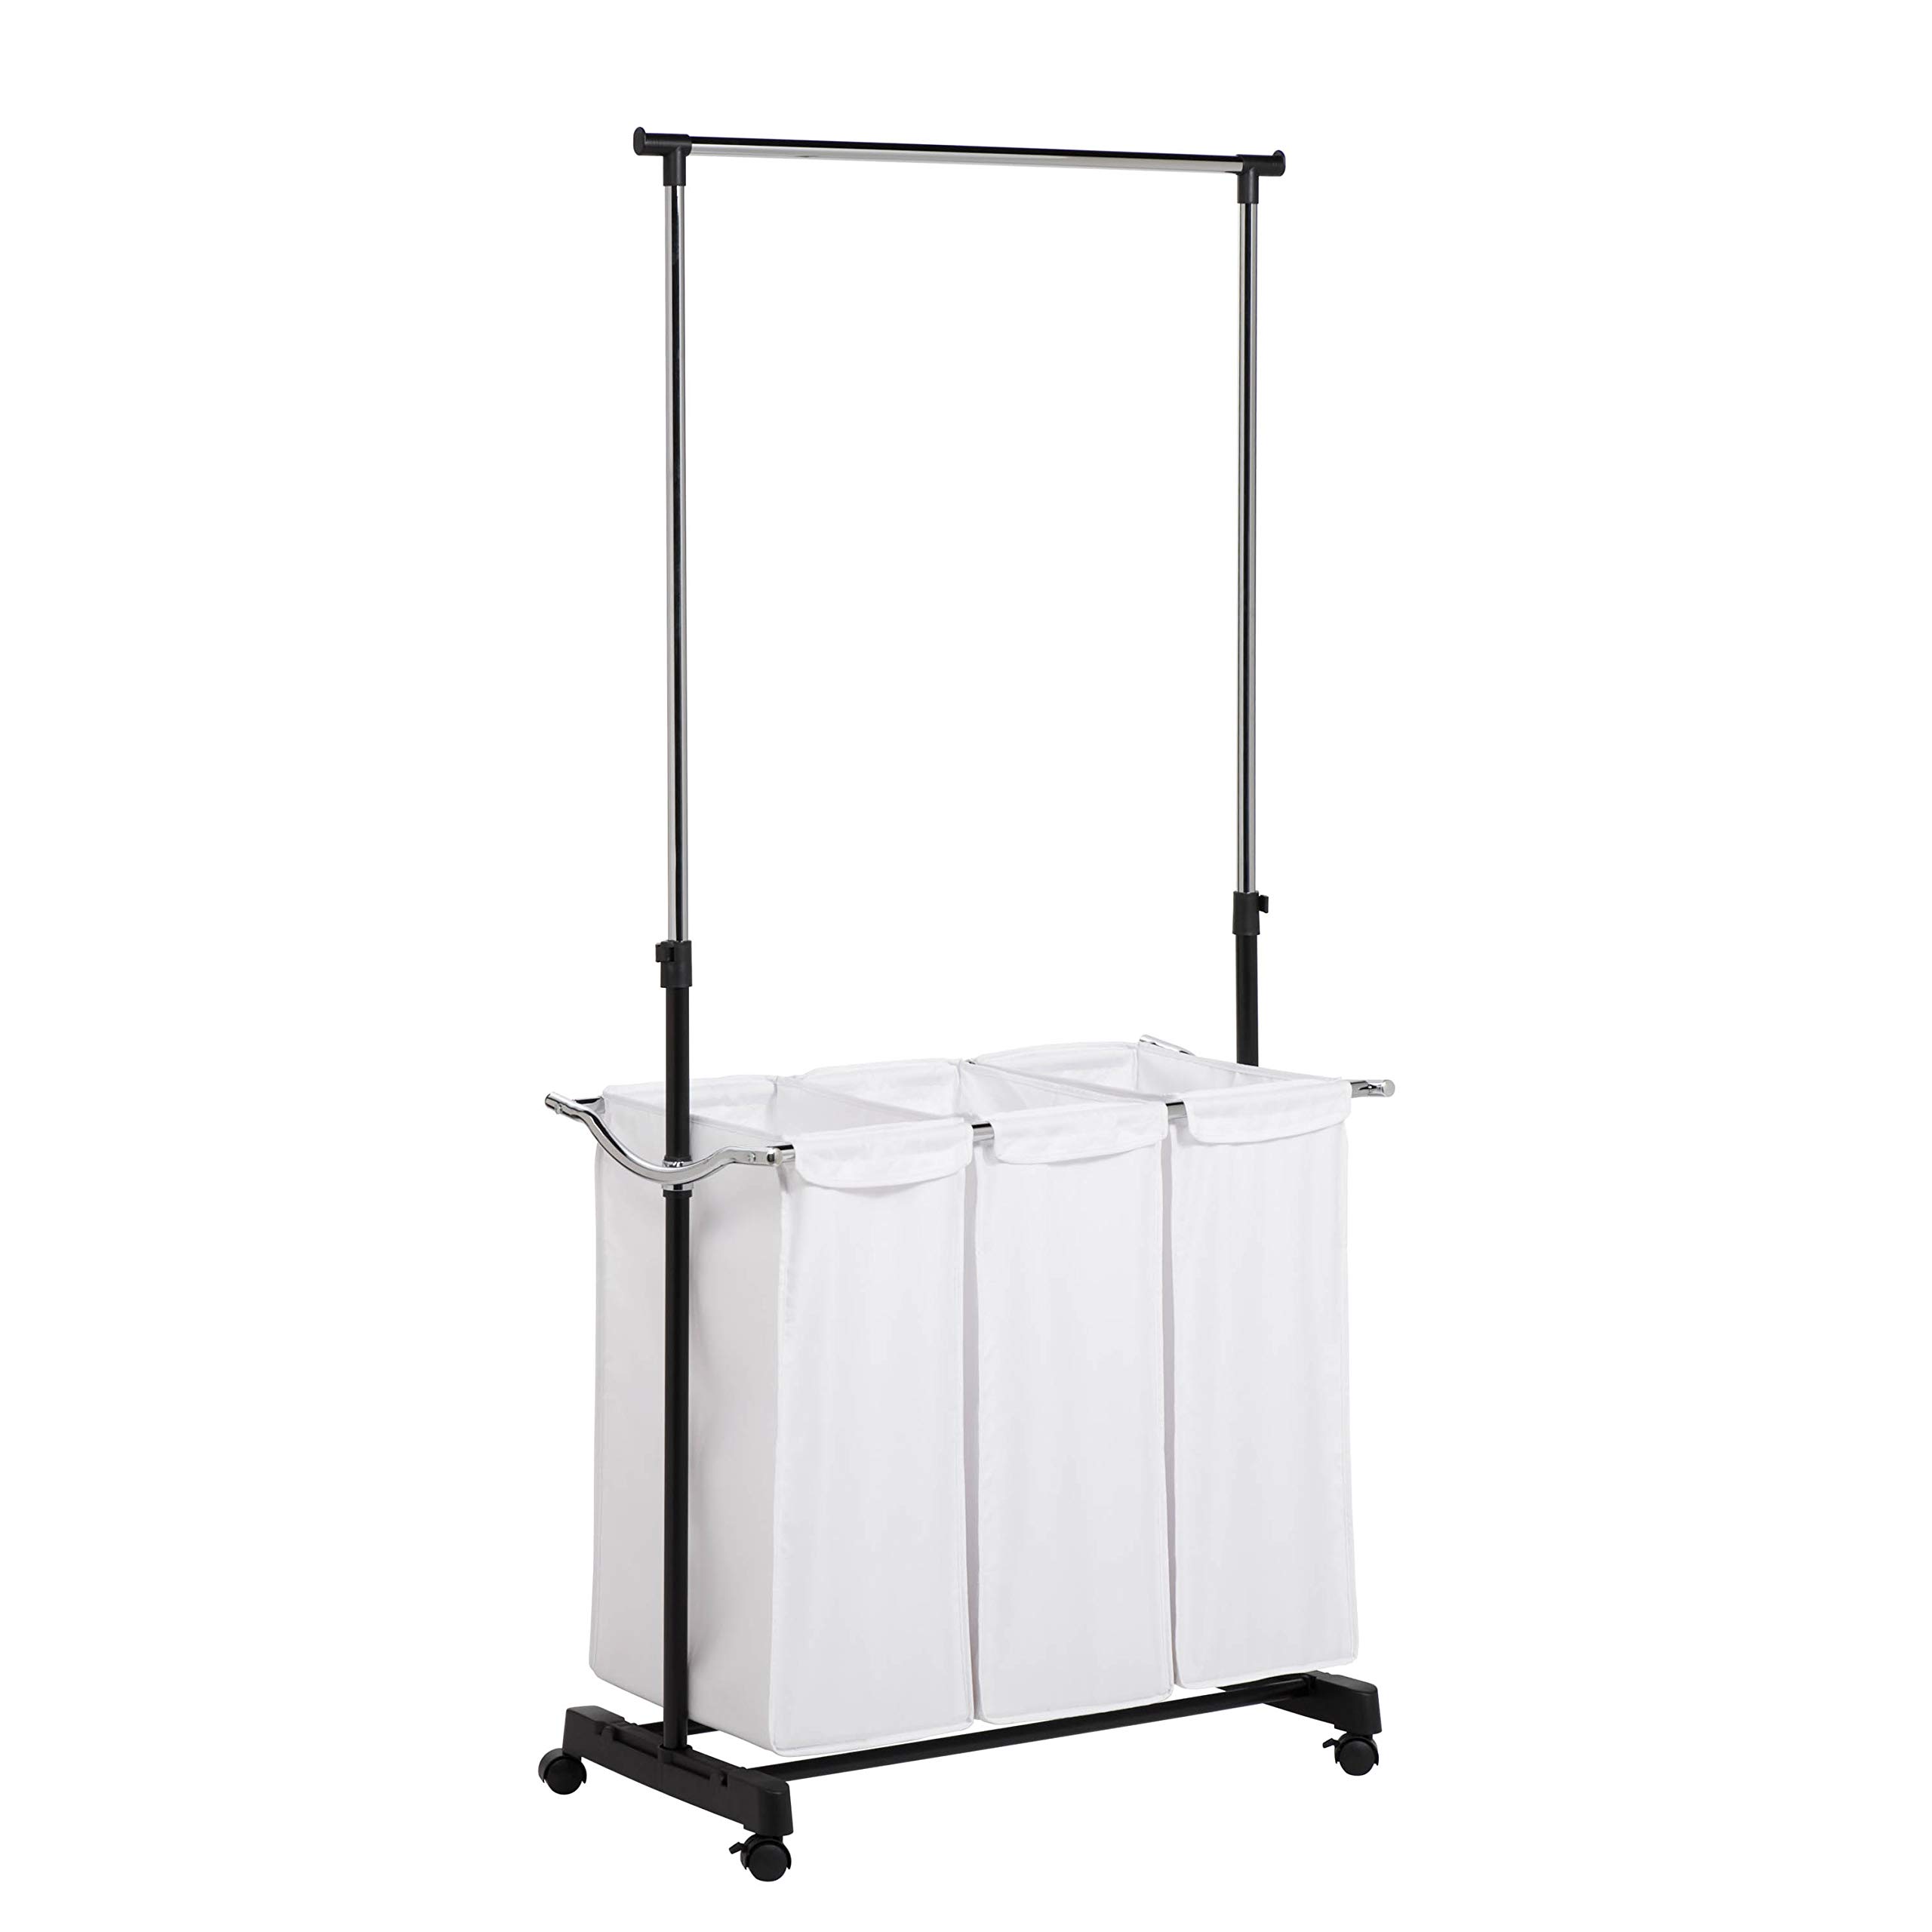 3-Bin Honey-Can-Do Rolling Laundry Cart with Hanging Bar $25.85 + Free Shipping